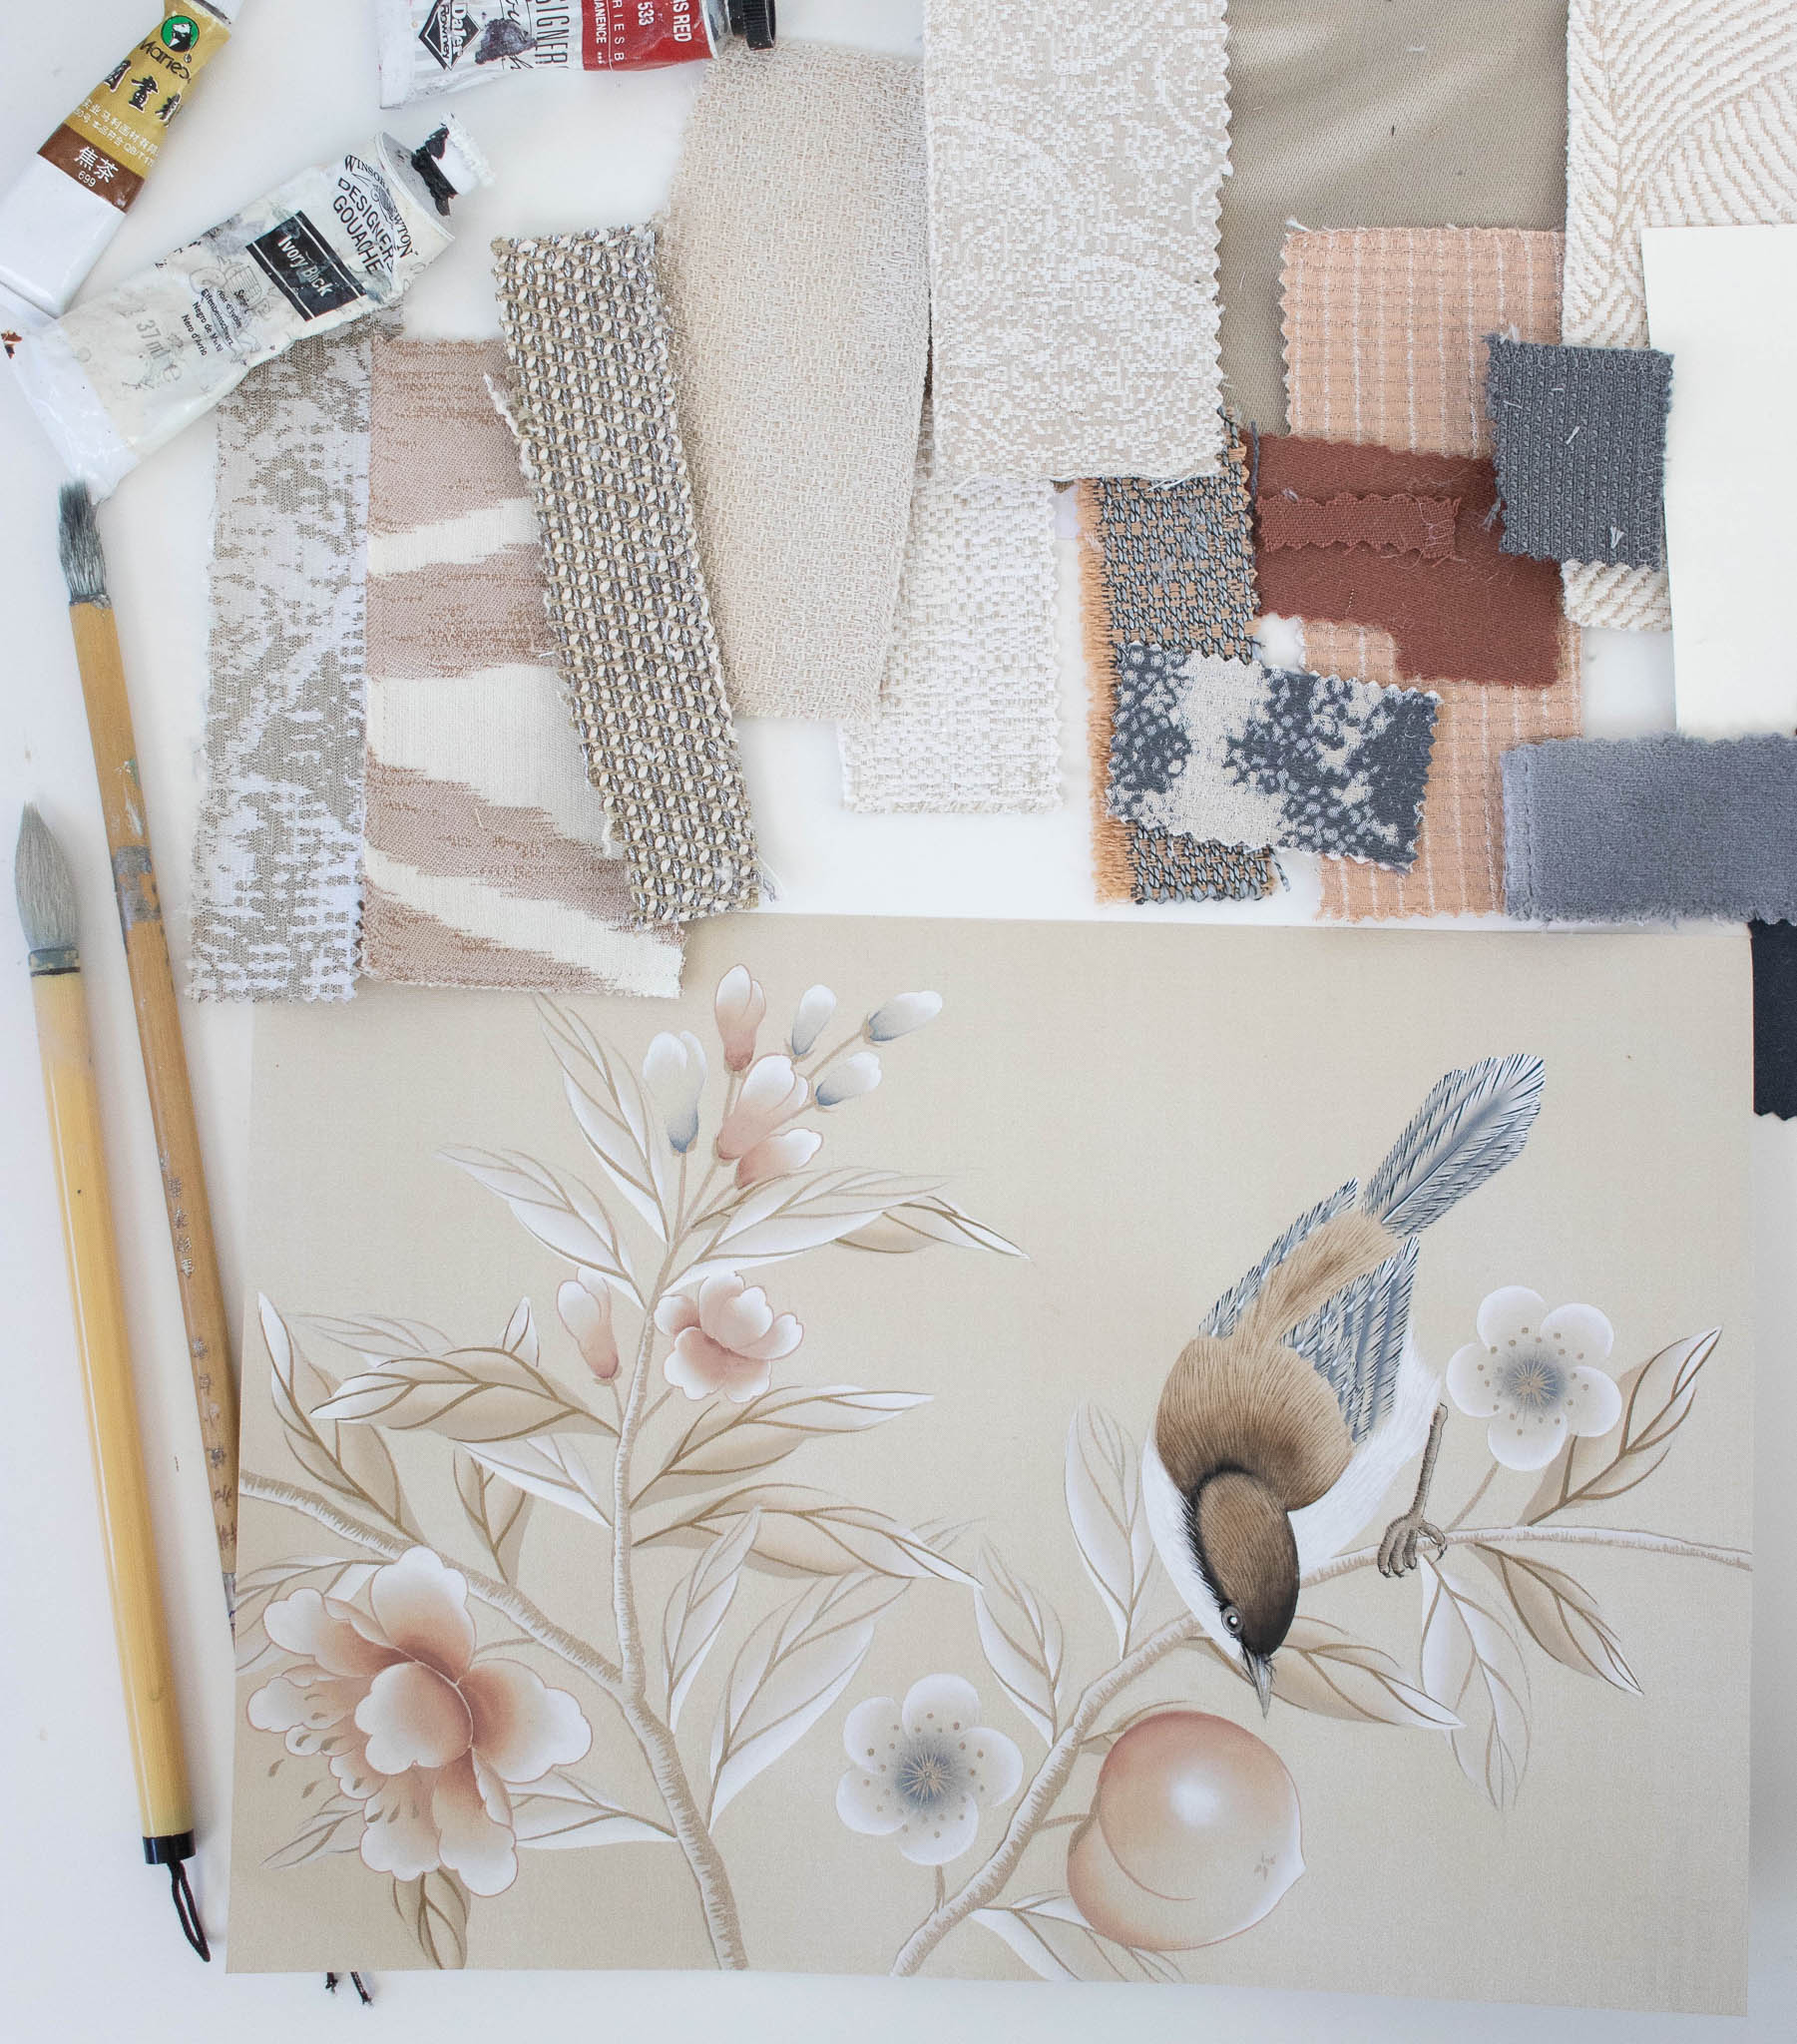 botanical bird chinoiserie design with Chinese paintbrushes and home decor fabric swatches to create visual mood board